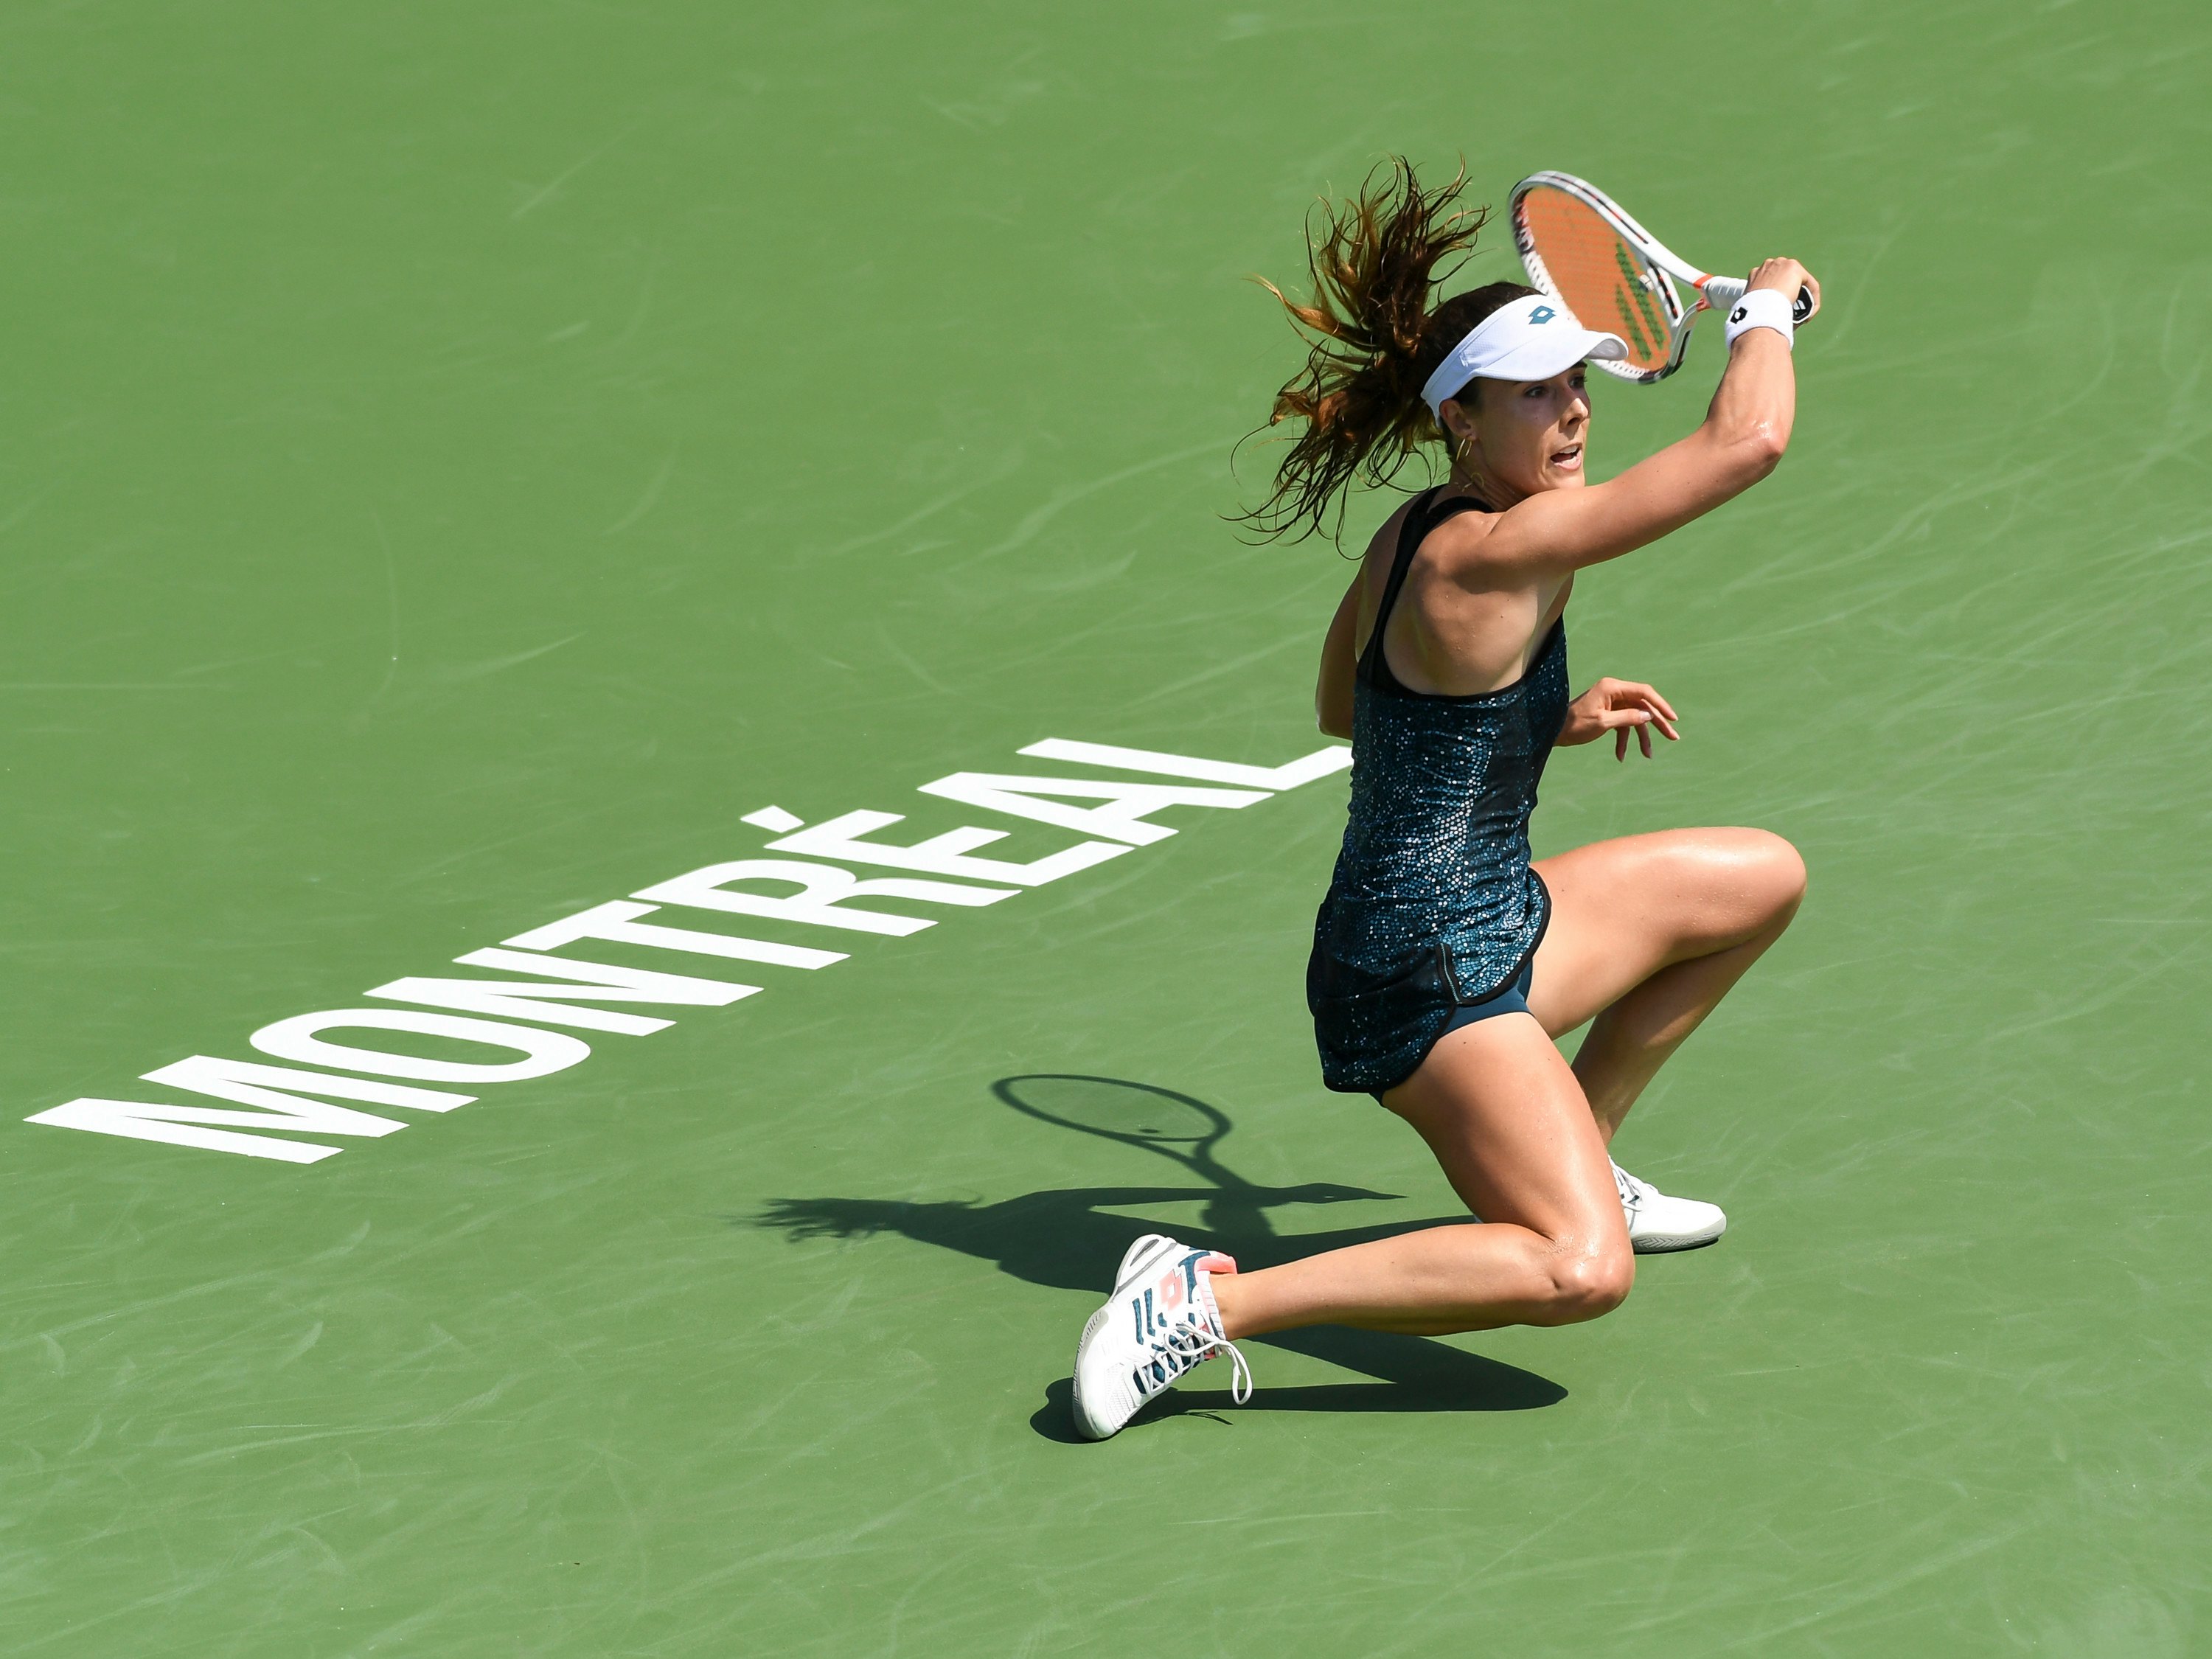 Tennis Player Alizé Cornet Was Penalized During The U.S. Open